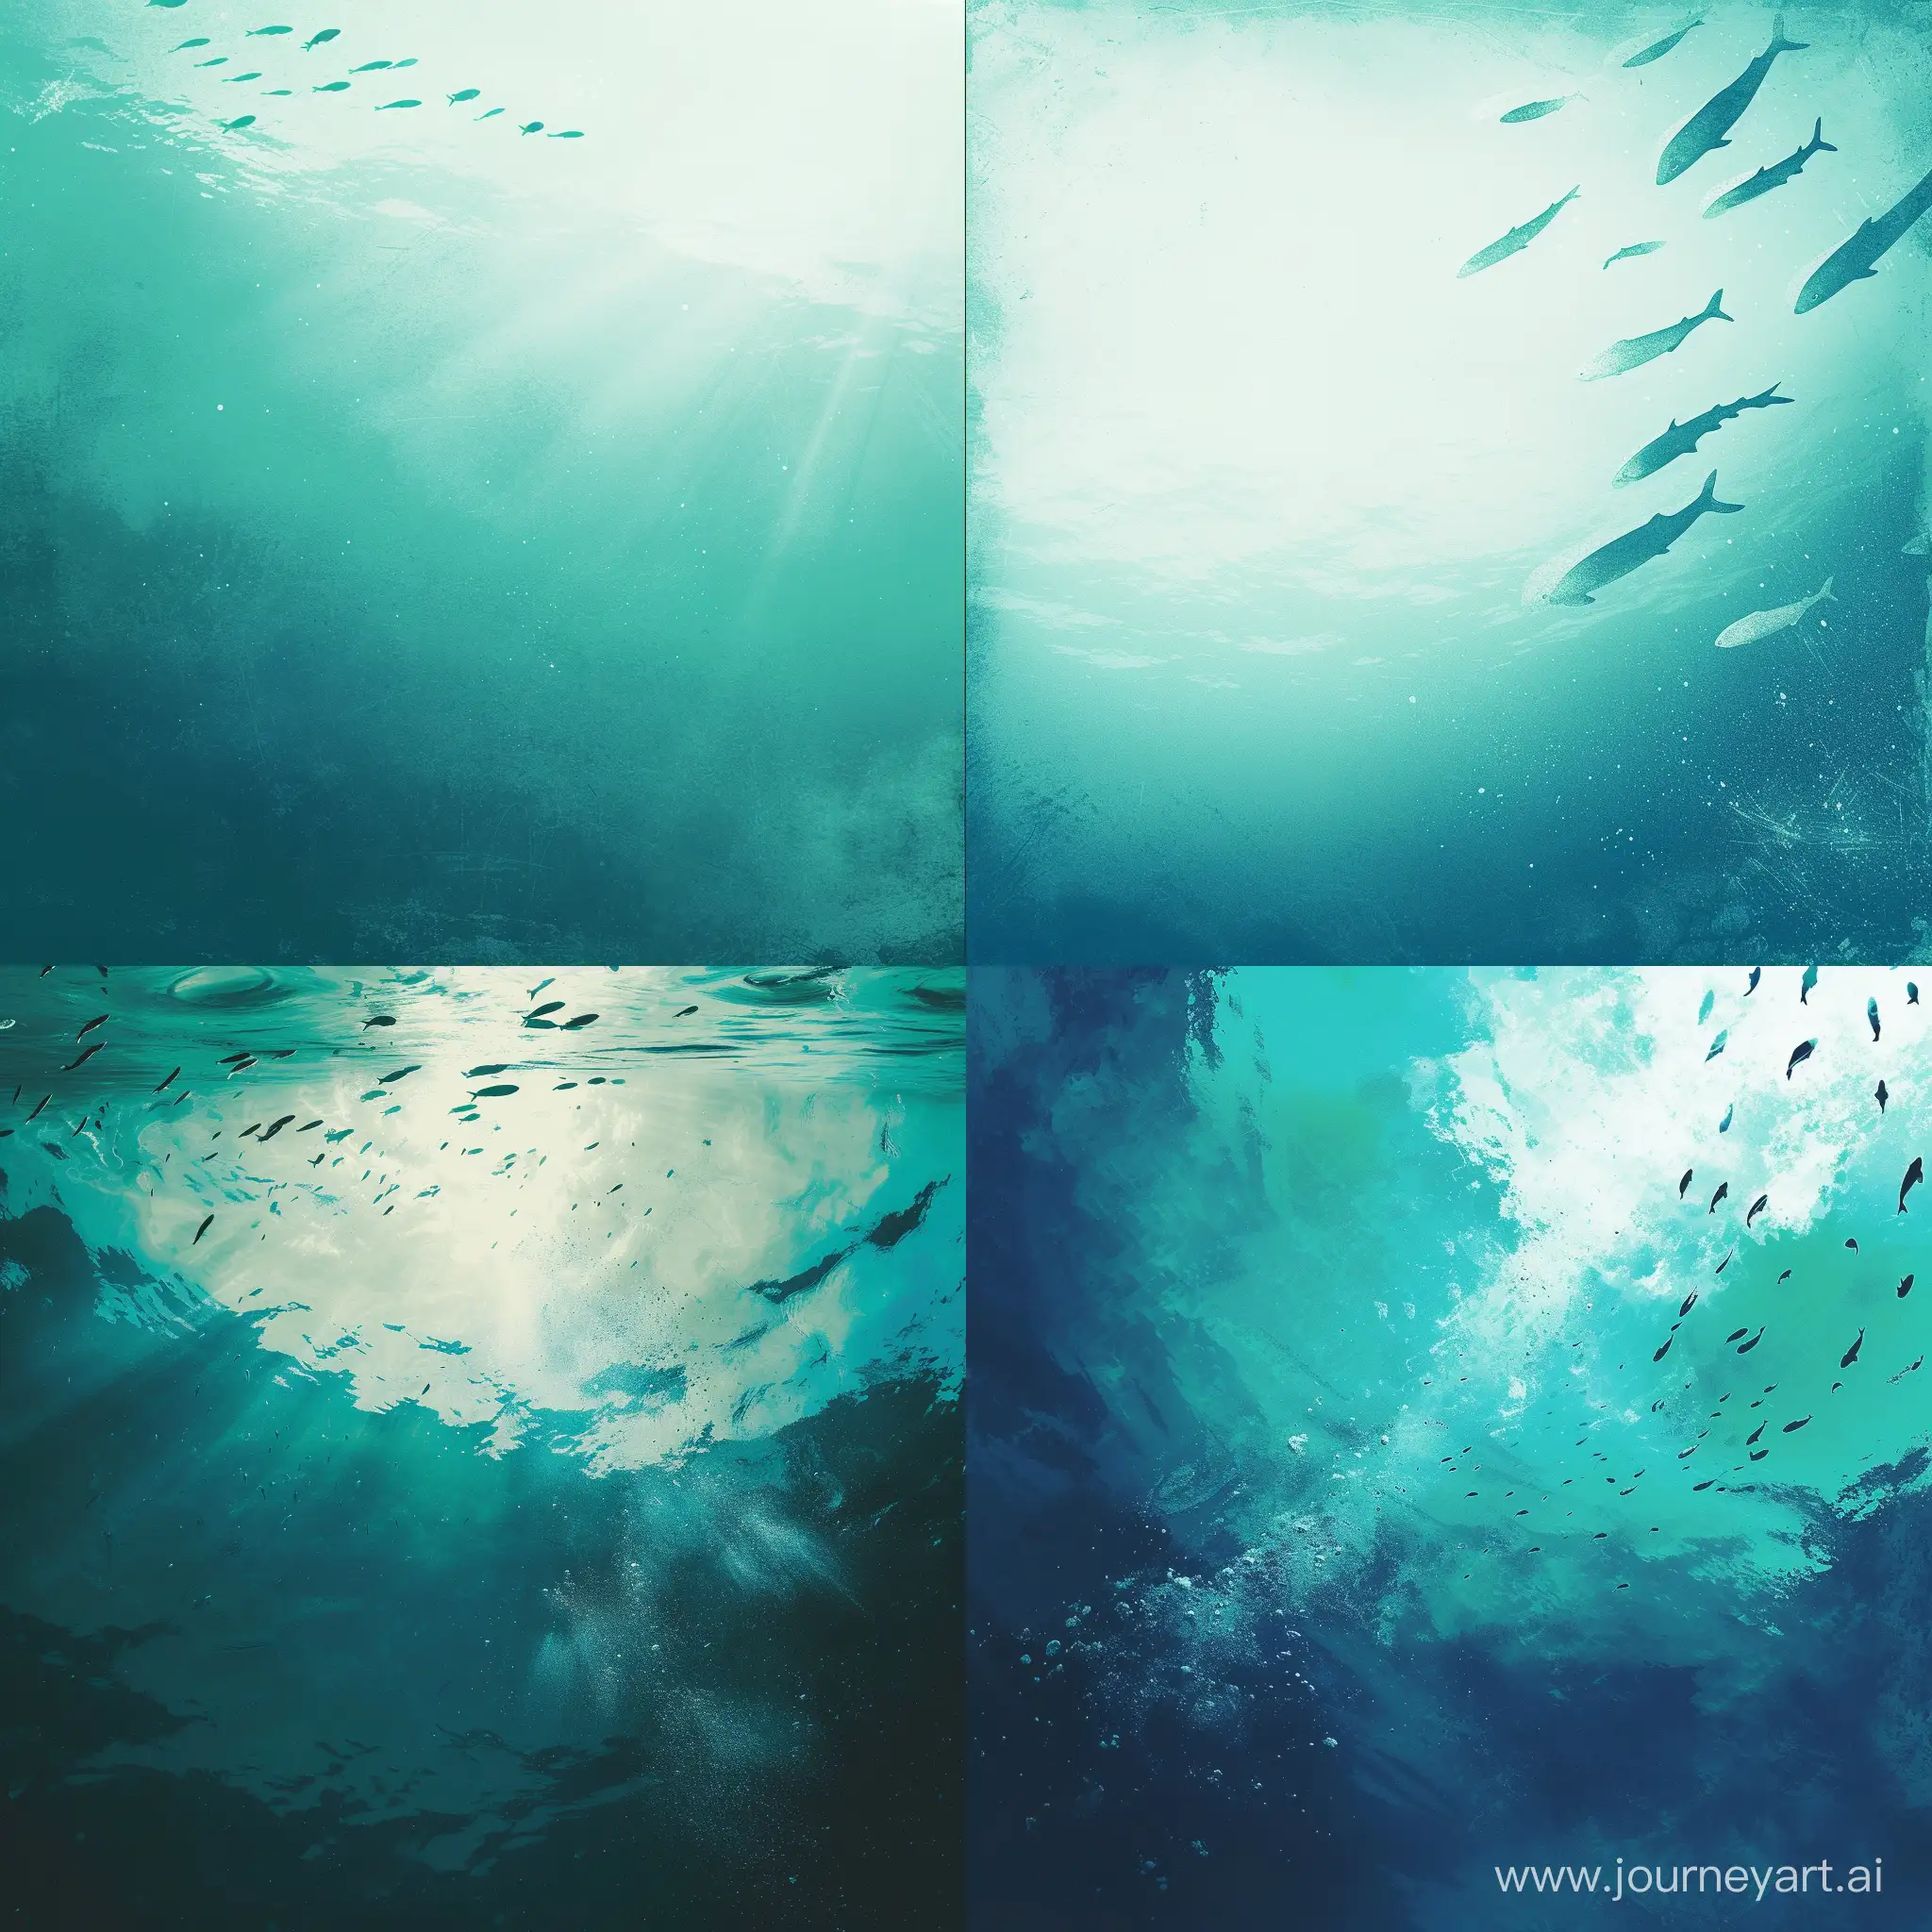 an example of a music album cover is a minimalistic style sea topic fish underwater blue white turquoise and deep green colors relaxed dreamy vibe